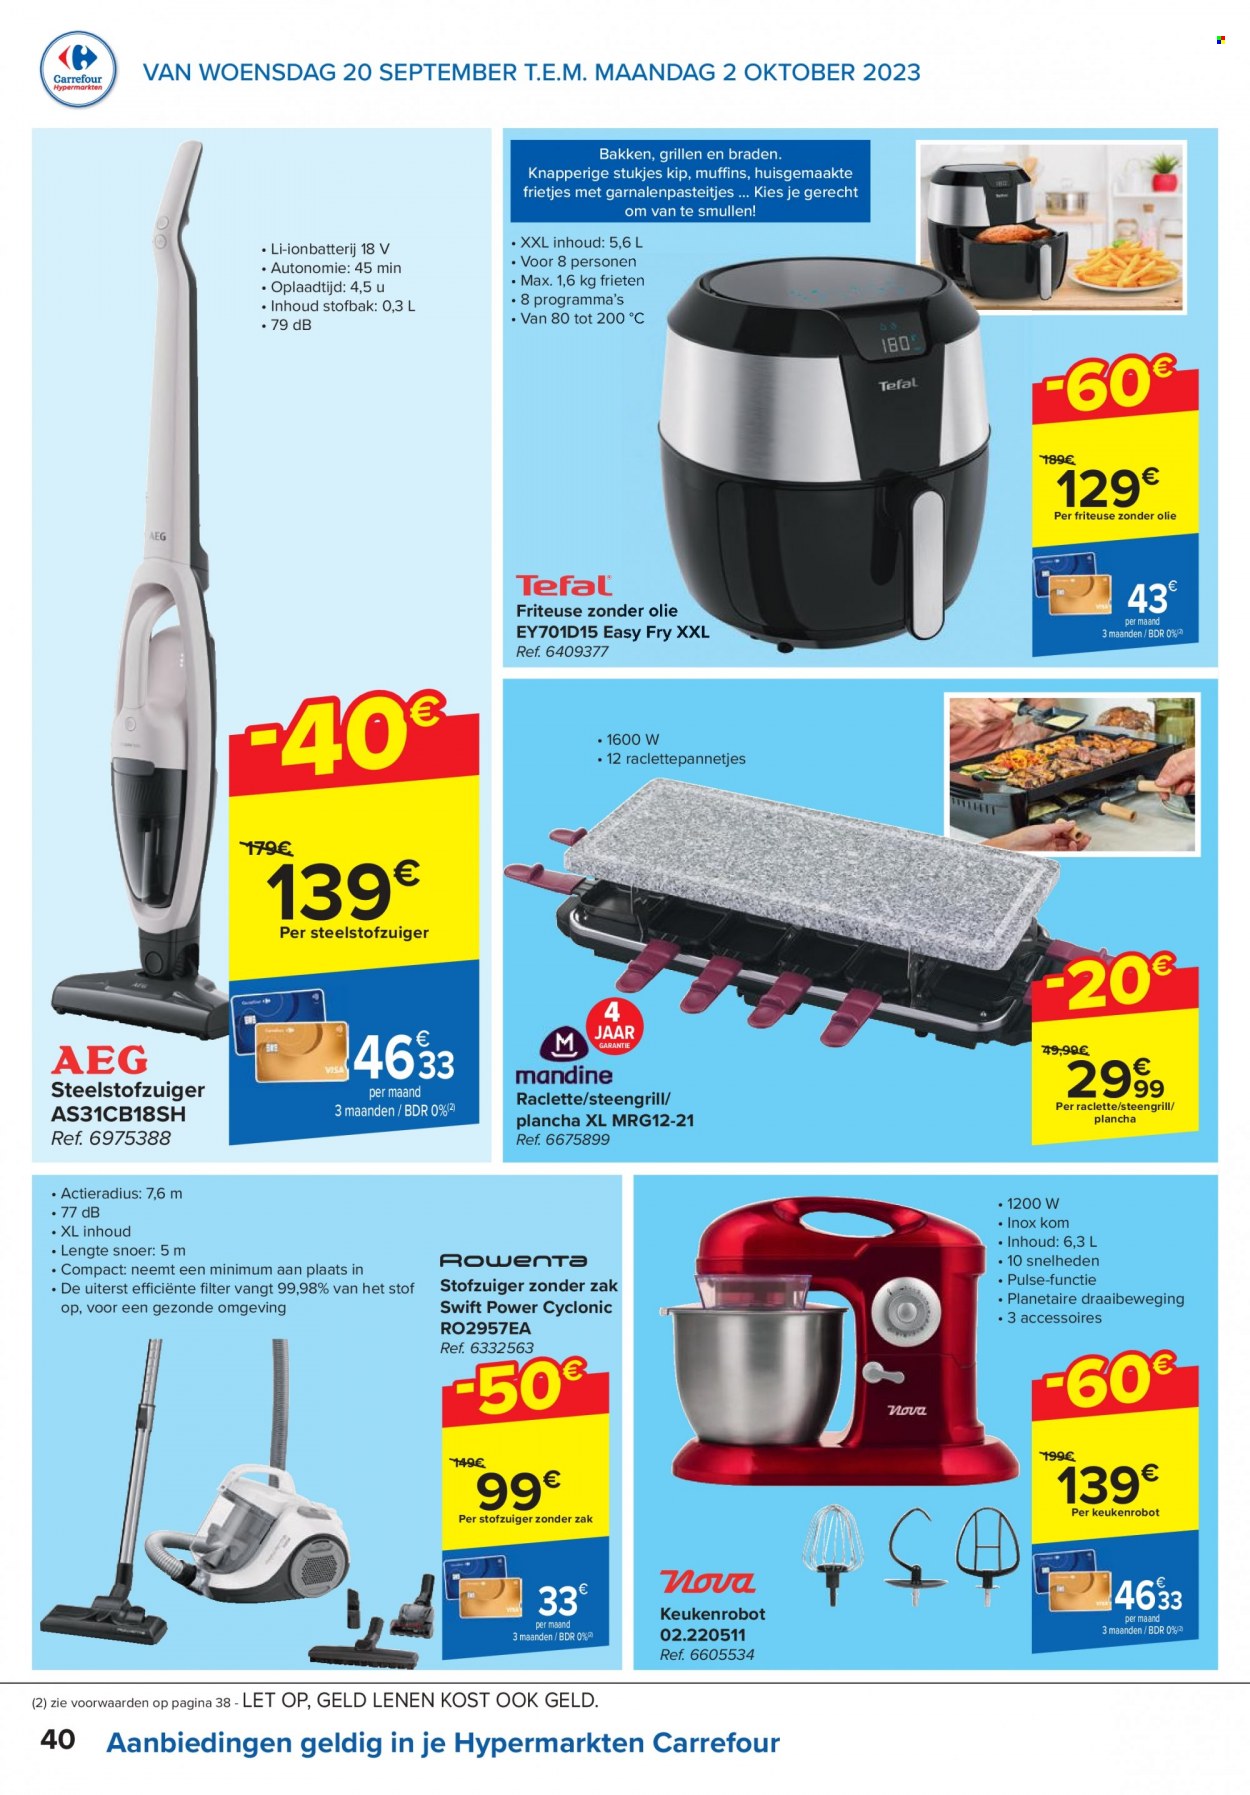 Catalogue Carrefour hypermarkt - 20.9.2023 - 2.10.2023. Page 40.